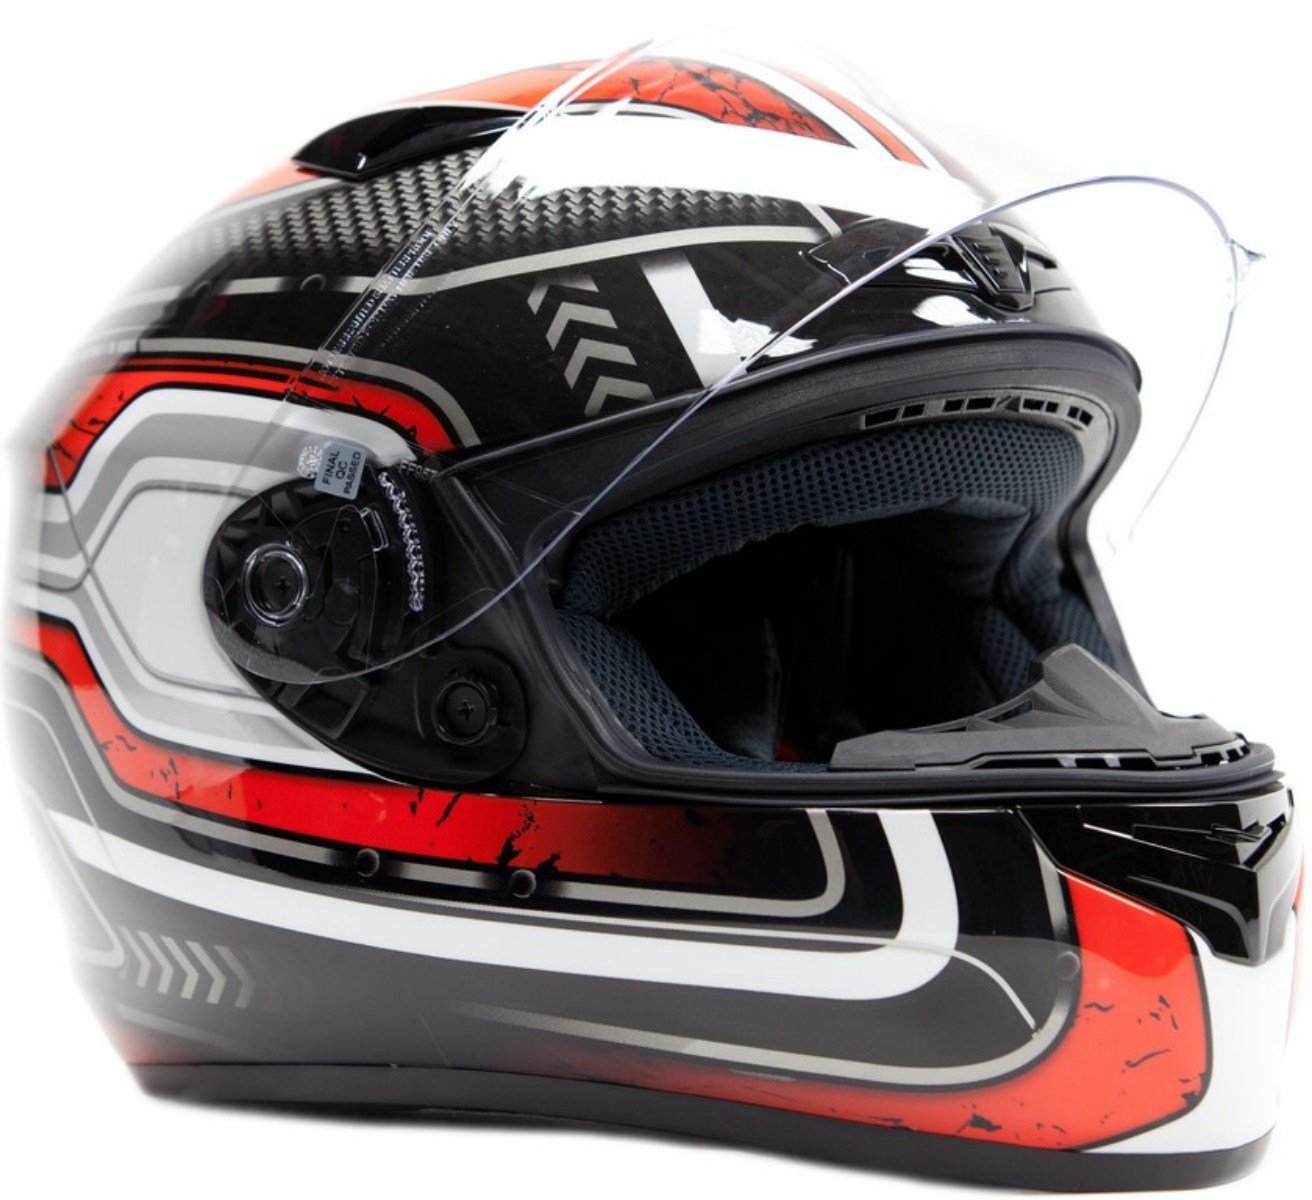 Snell M2010 DOT Approved Full Face Helmet w/ Free Smoke Tinted Shield ( Large - Black / Red )